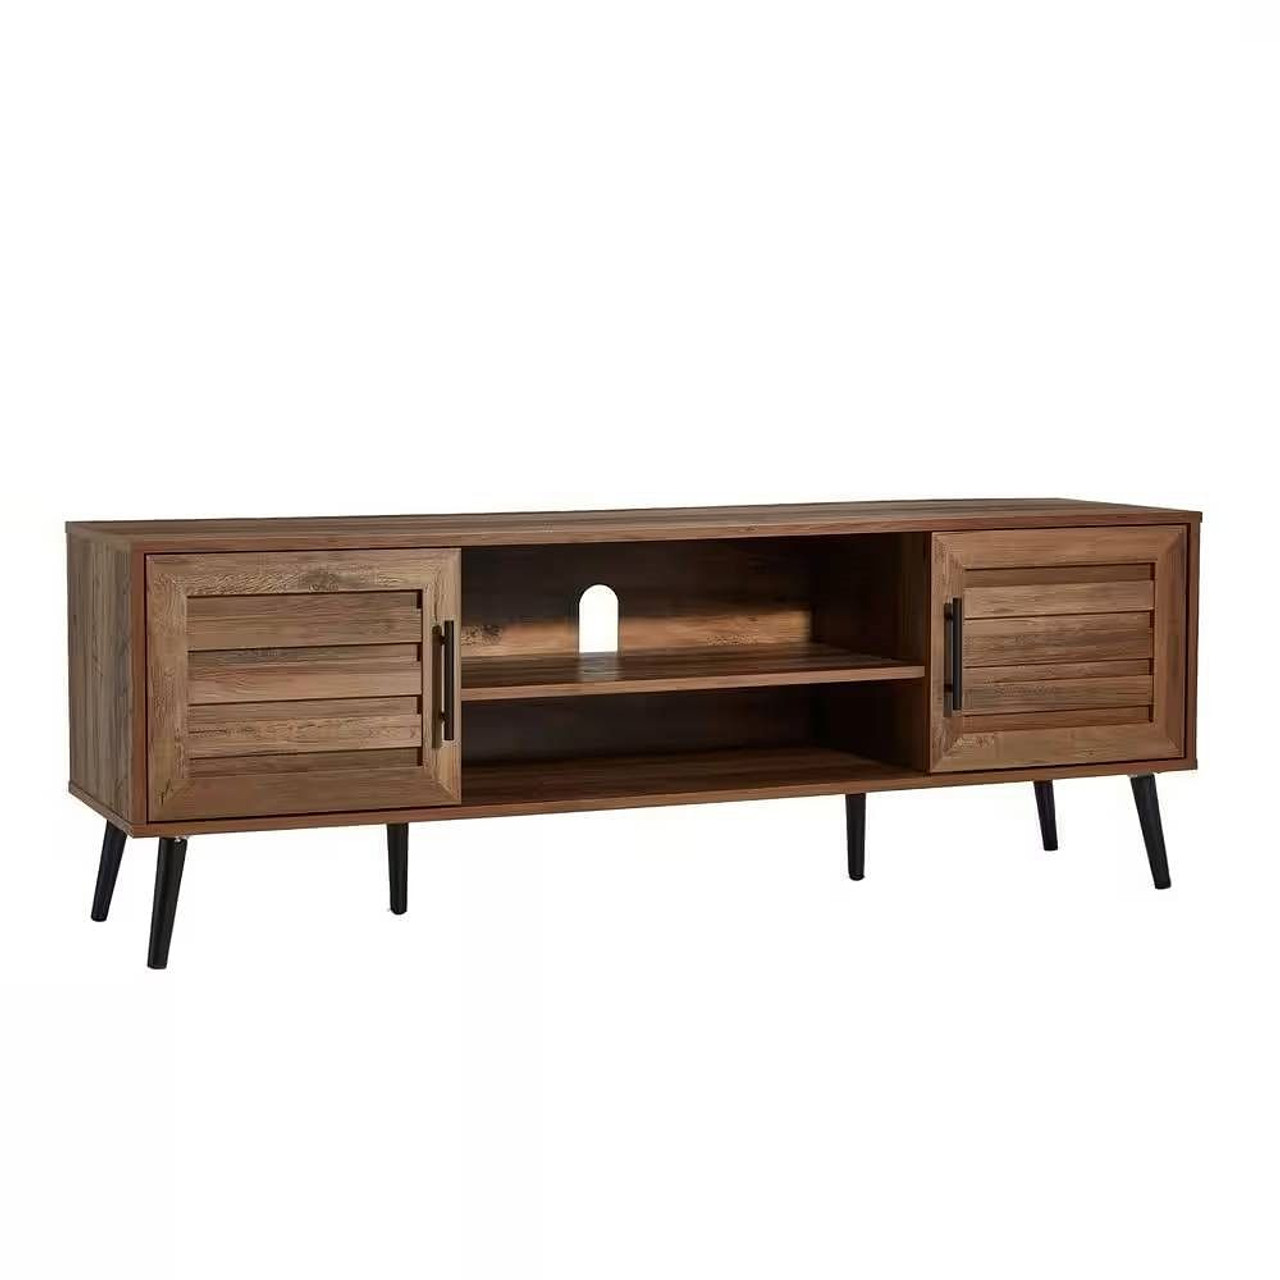 Modern Rustic Wood Finish TV Stand with Mid-Century Legs - for TV up to 65-inch